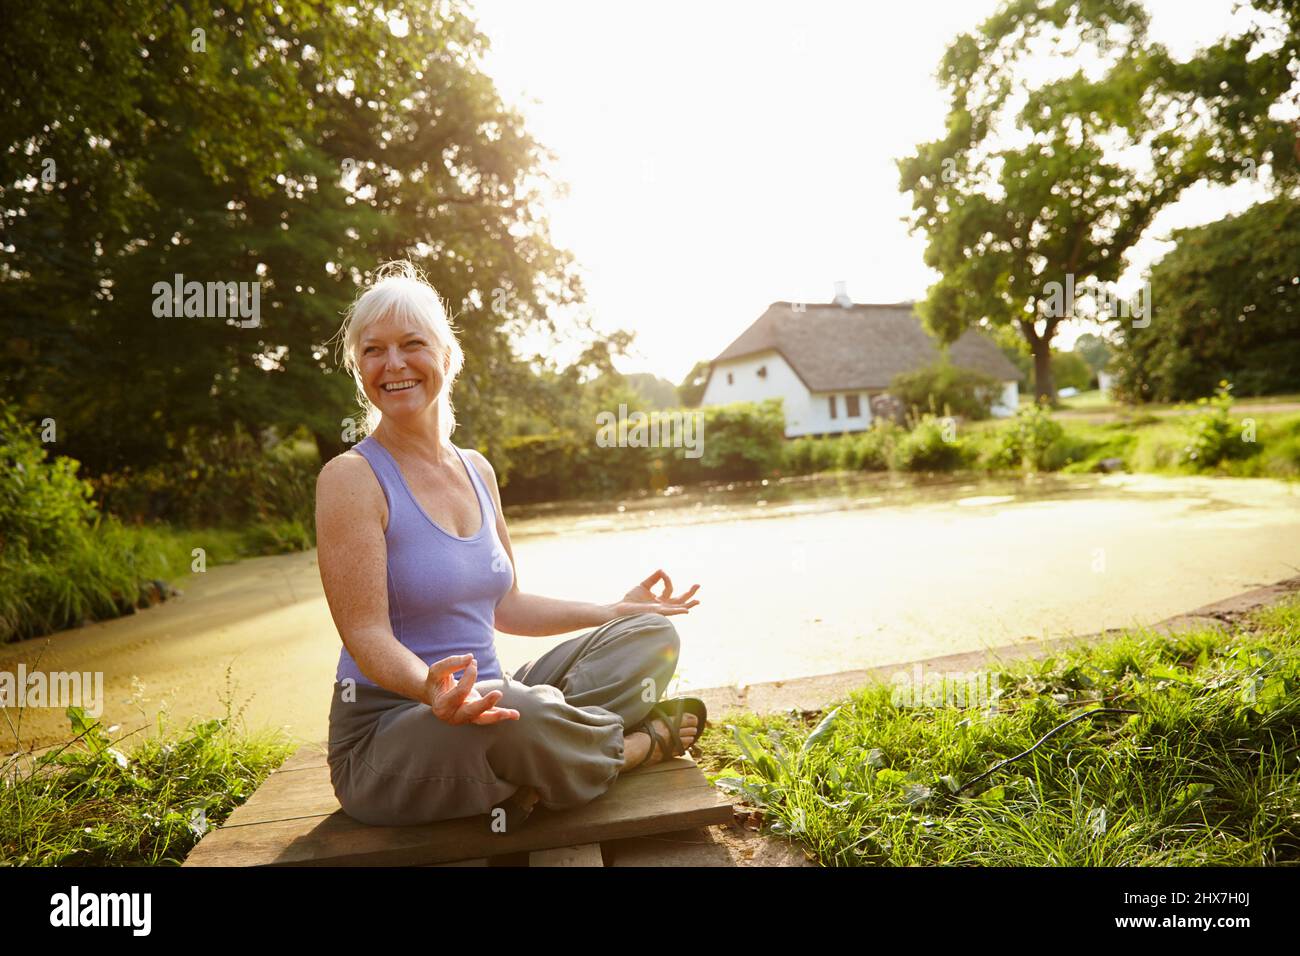 Just enjoying the beauty around her. Shot of an attractive mature woman meditating in a garden at sunset. Stock Photo